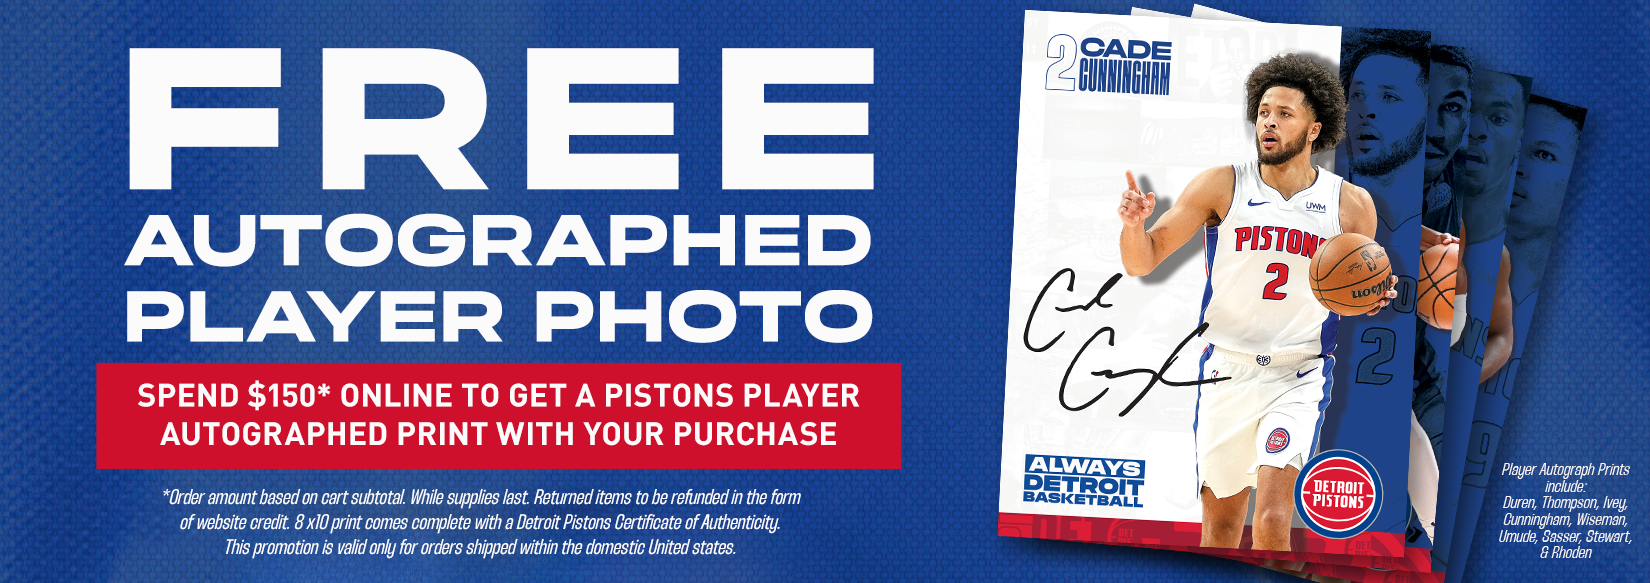 <strong>Score a FREE Autographed 8X10 Detroit Pistons Player Photo* with qualifying $150+ online orders!</strong> <strong>Limited offer – while supplies last.</strong> Each print comes with a Detroit Pistons Certificate of Authenticity and features signatures from top players like Duren, Thompson, Ivey, and more